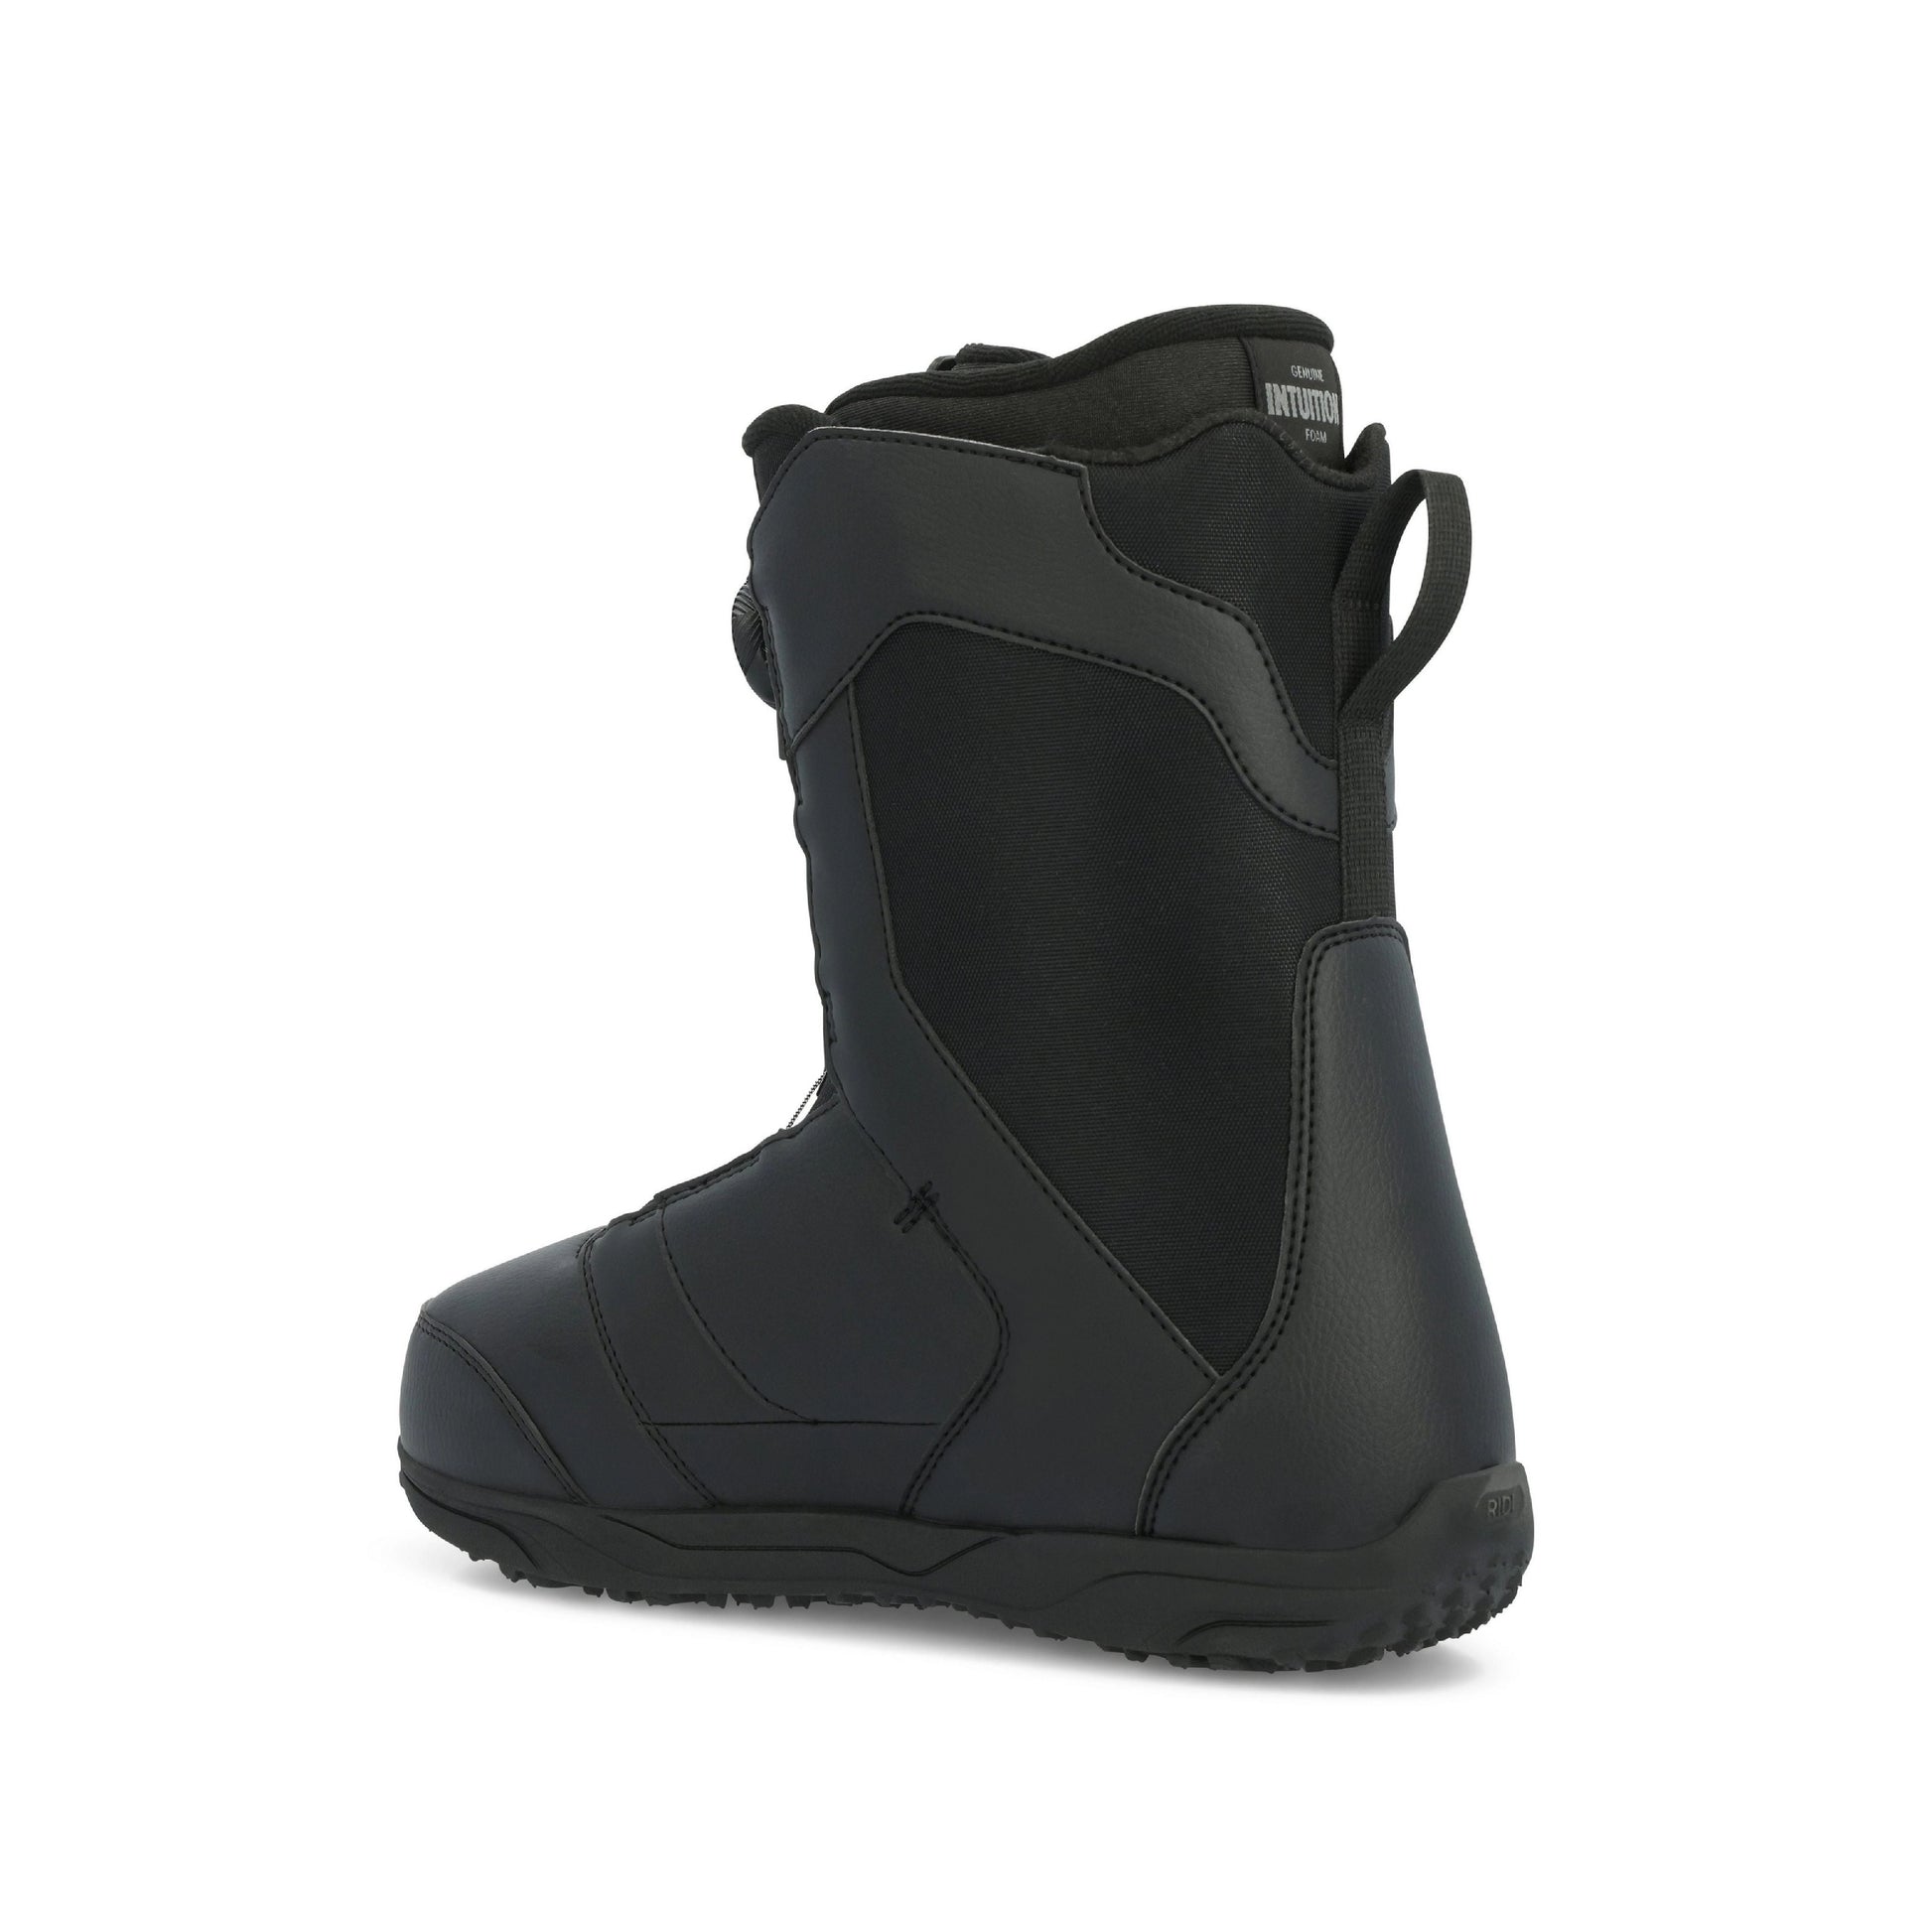 Ride Rook Snowboard Boots - Openbox Black 9 - Ride Snowboard Boots